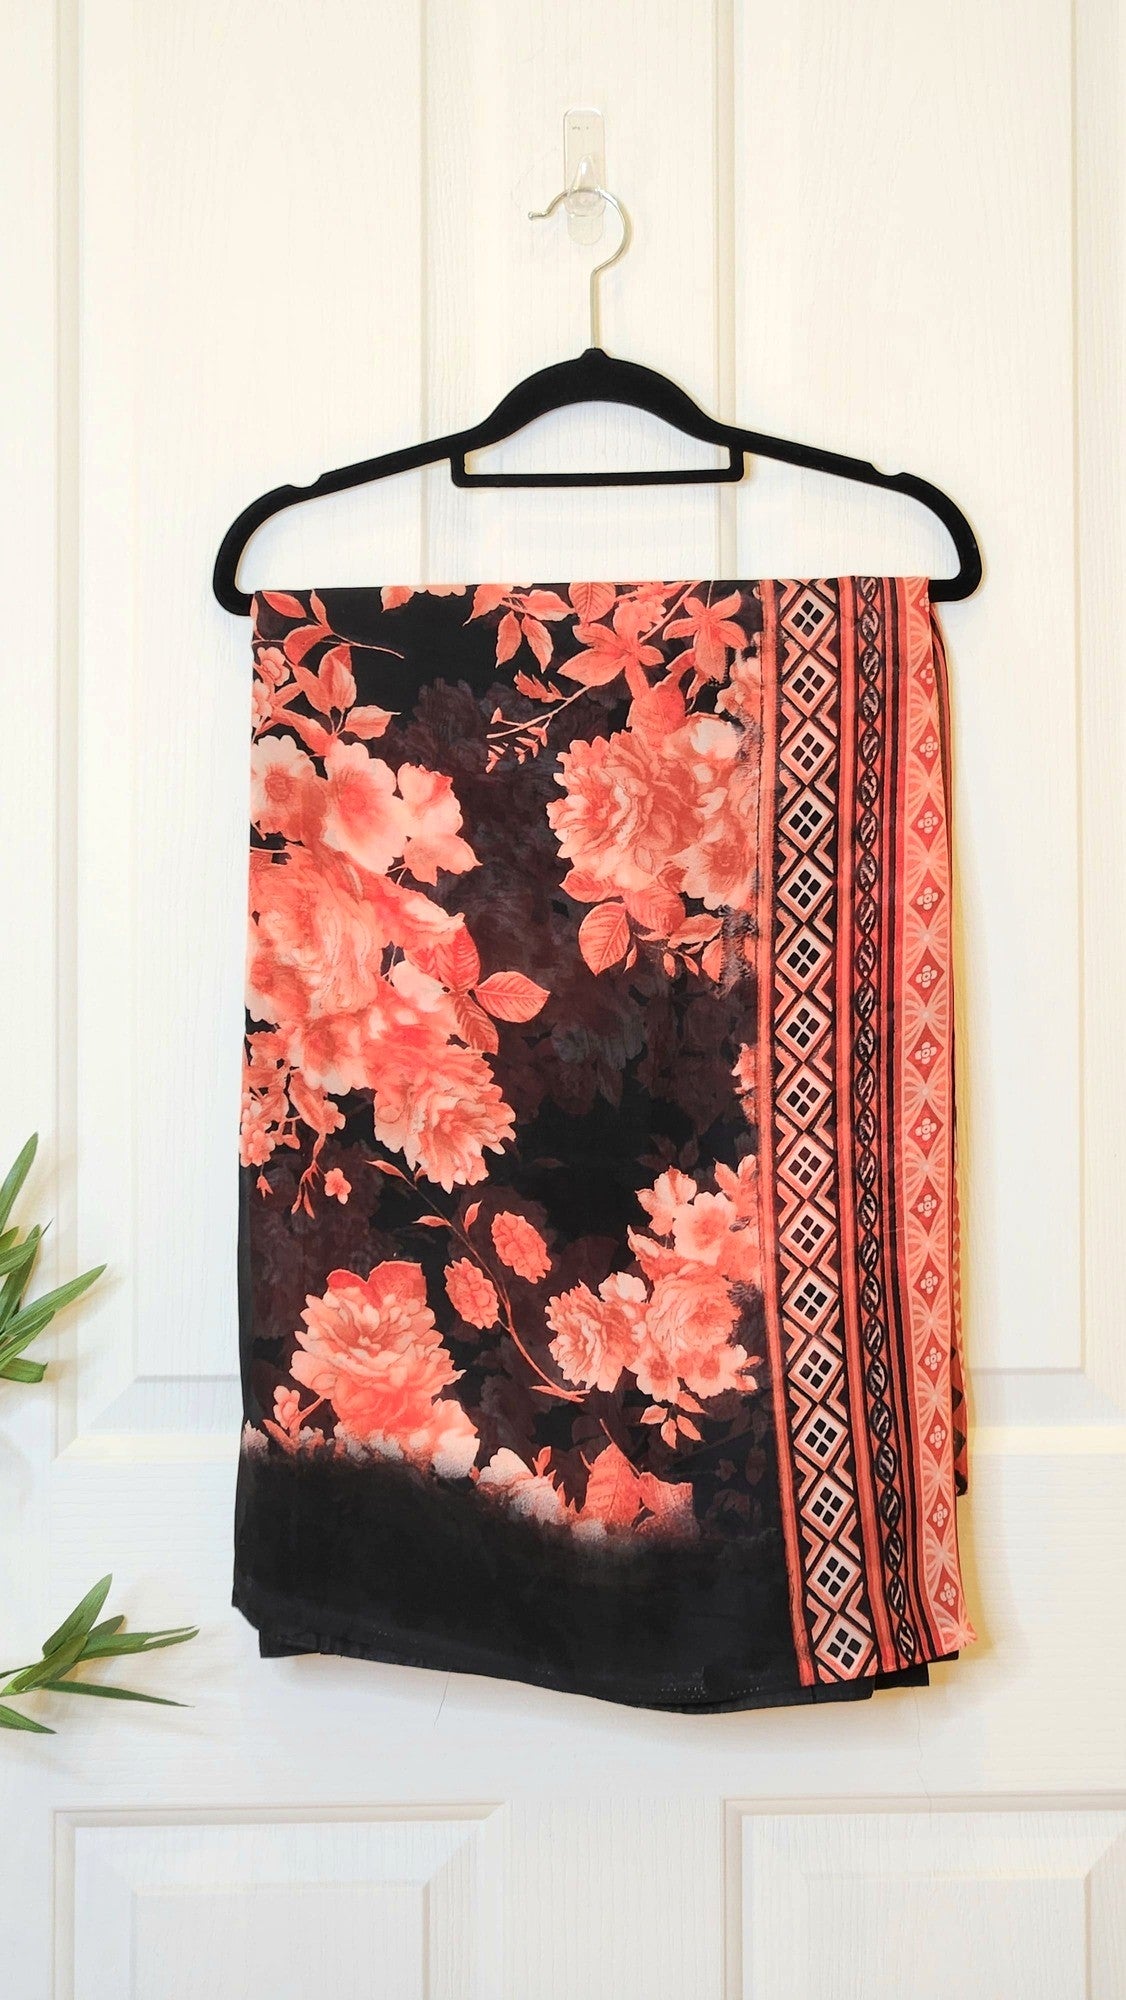 Chiffon Floral Saree in Black with Mixed Color Palette Poppy